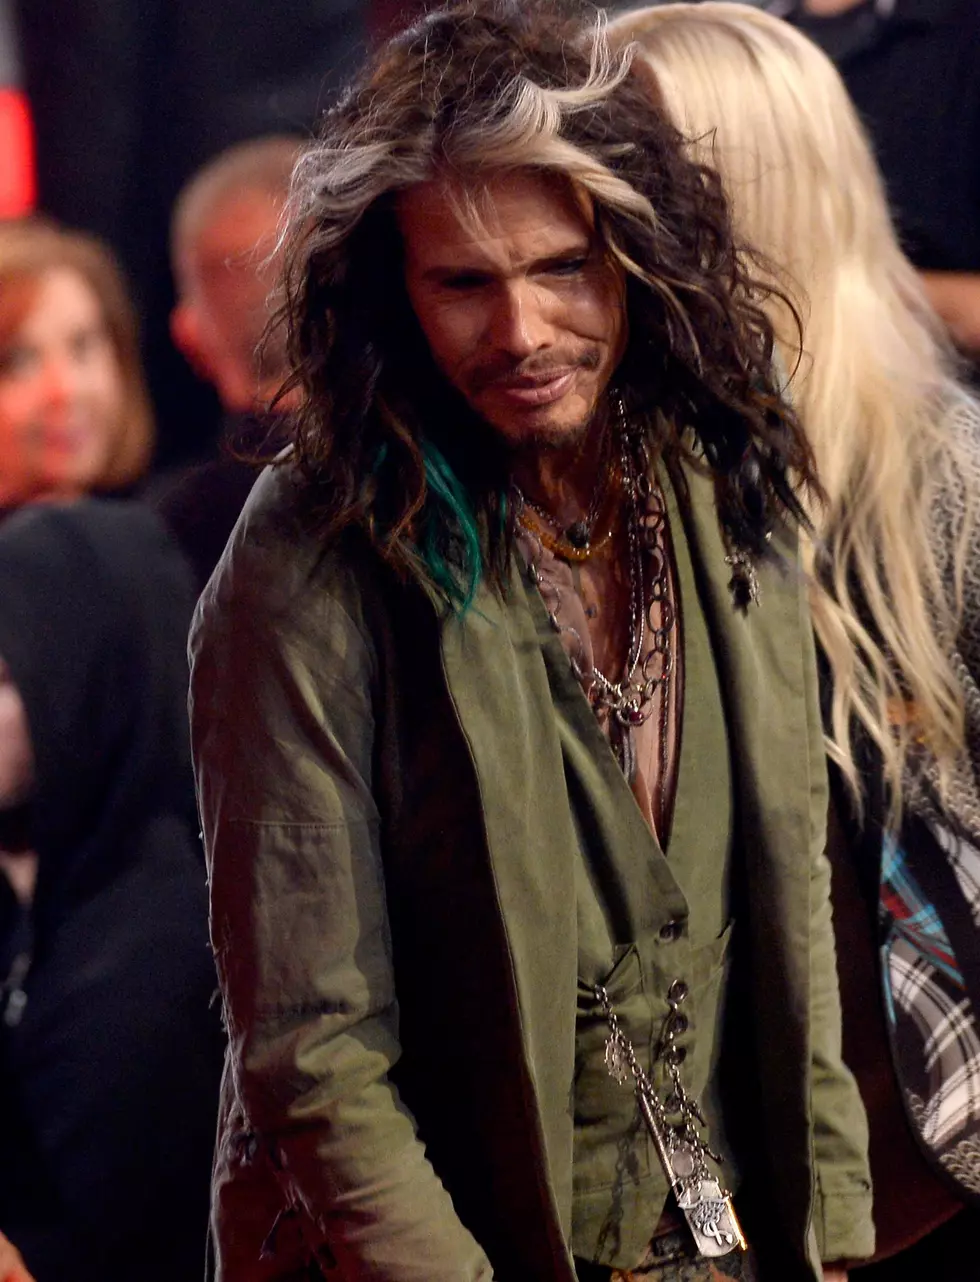 Steven Tyler Is Awesome!